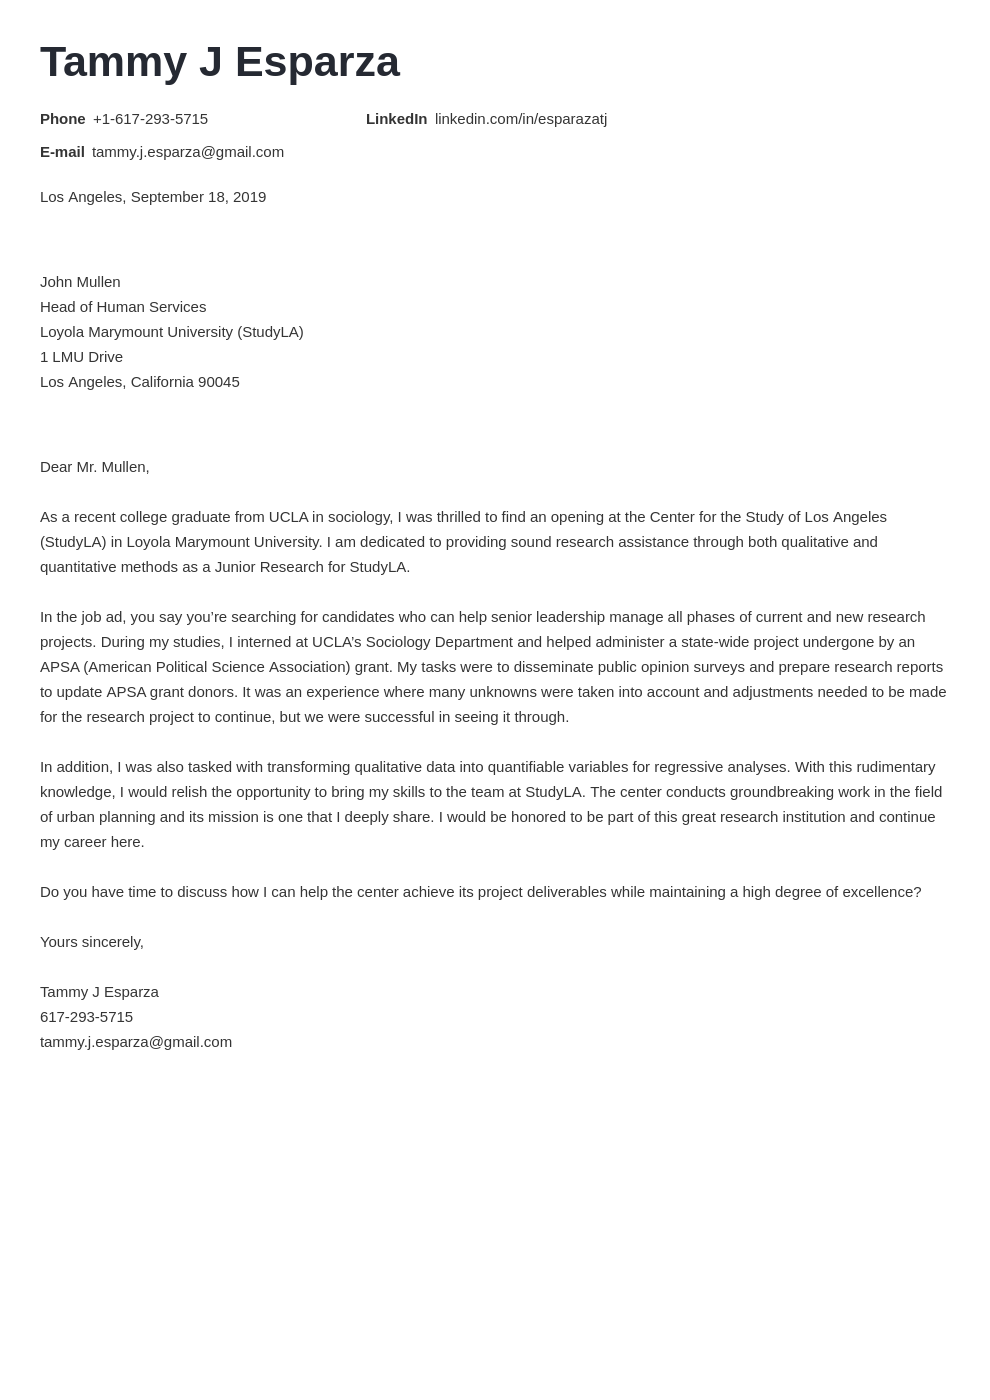 Research Assistant Cover Letter: Examples & Ready-To-Use ...